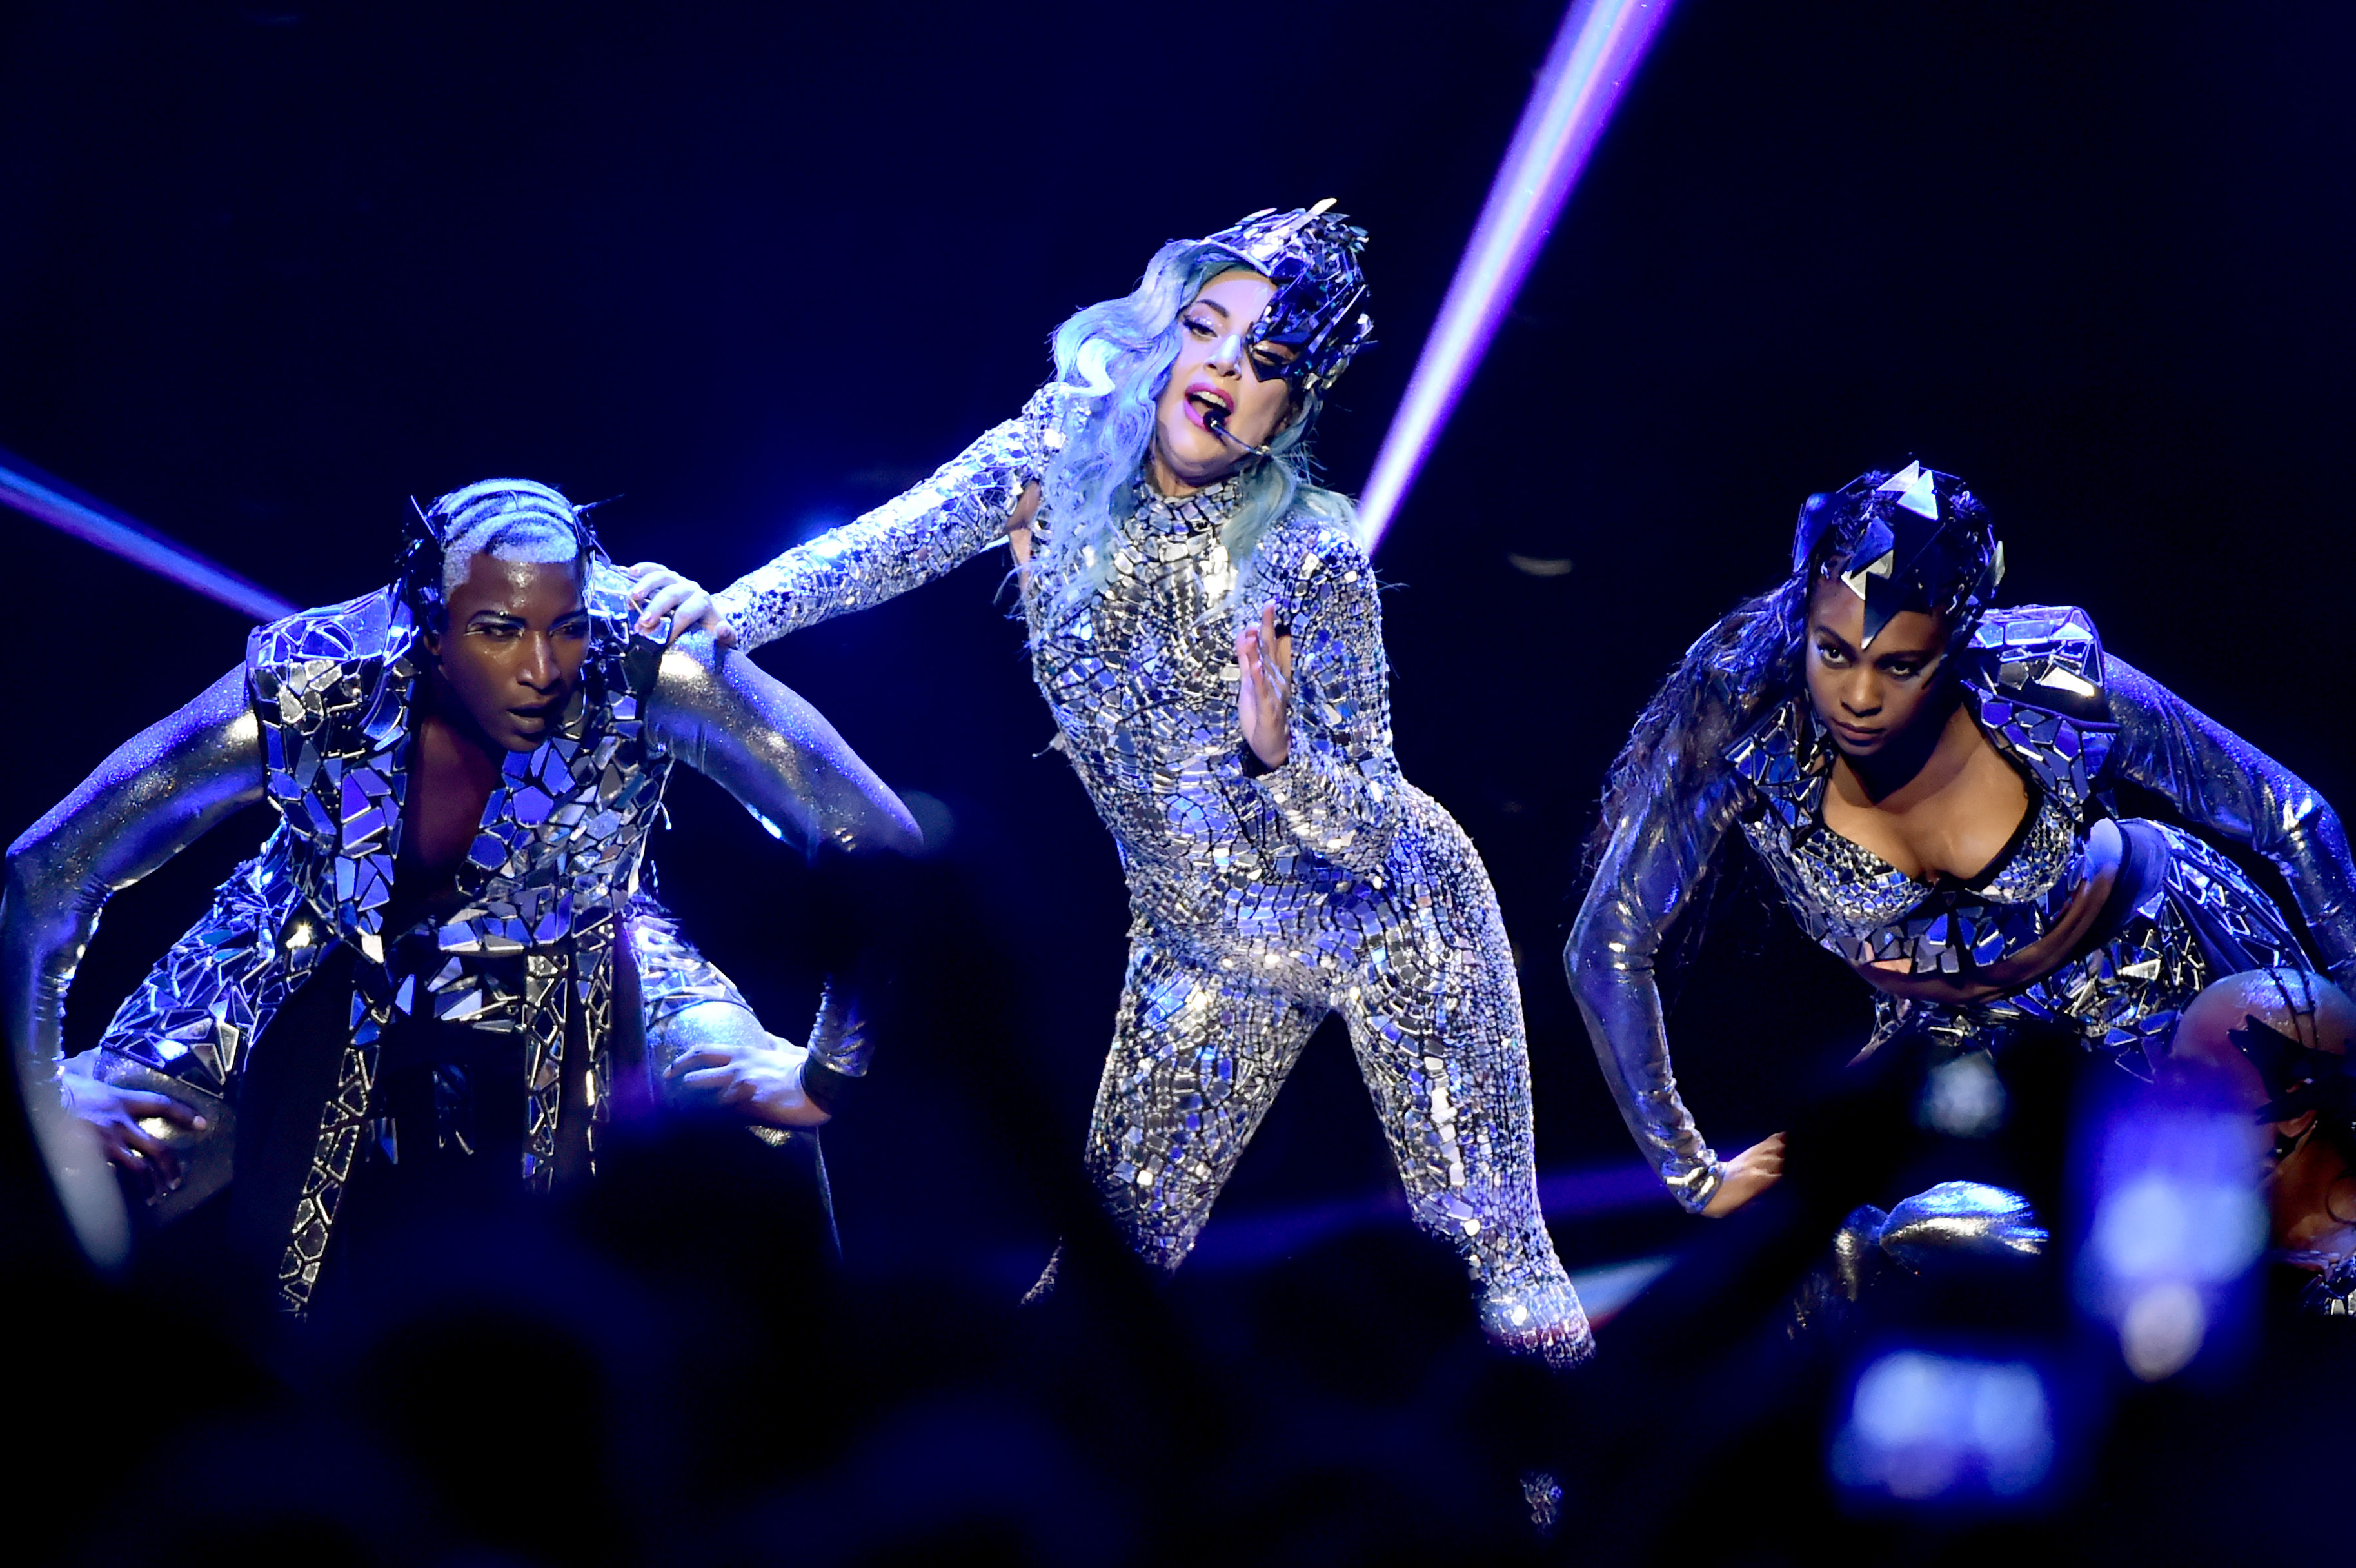 Lady Gaga performs on stage during AT&T TV Super Saturday Night